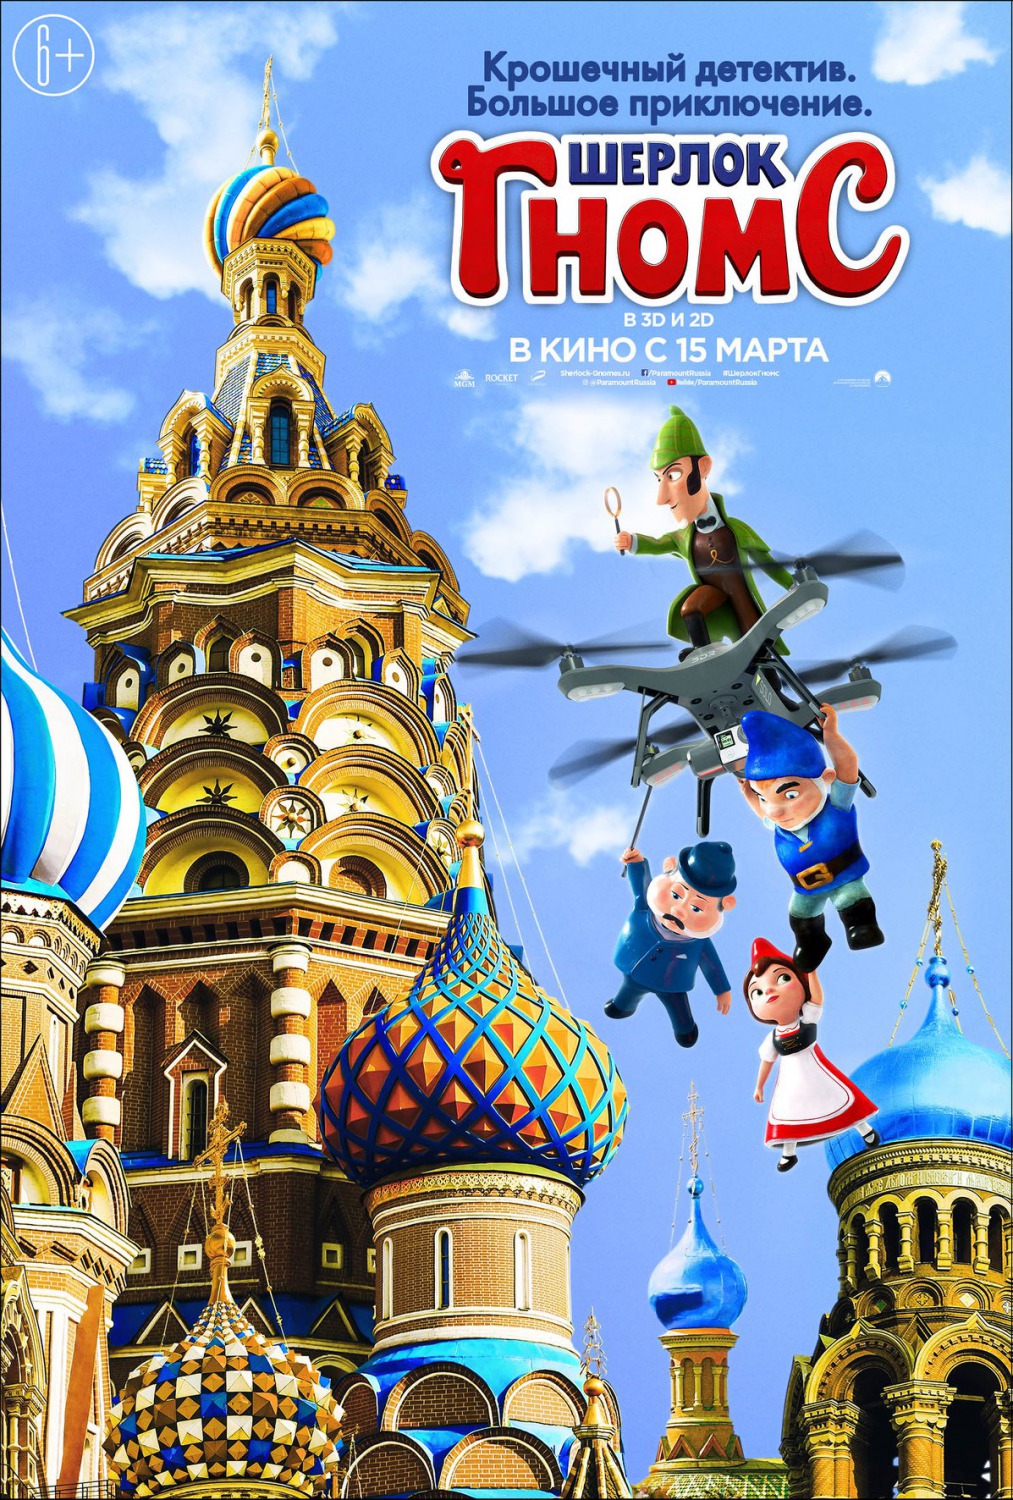 Extra Large Movie Poster Image for Gnomeo & Juliet: Sherlock Gnomes (#40 of 41)